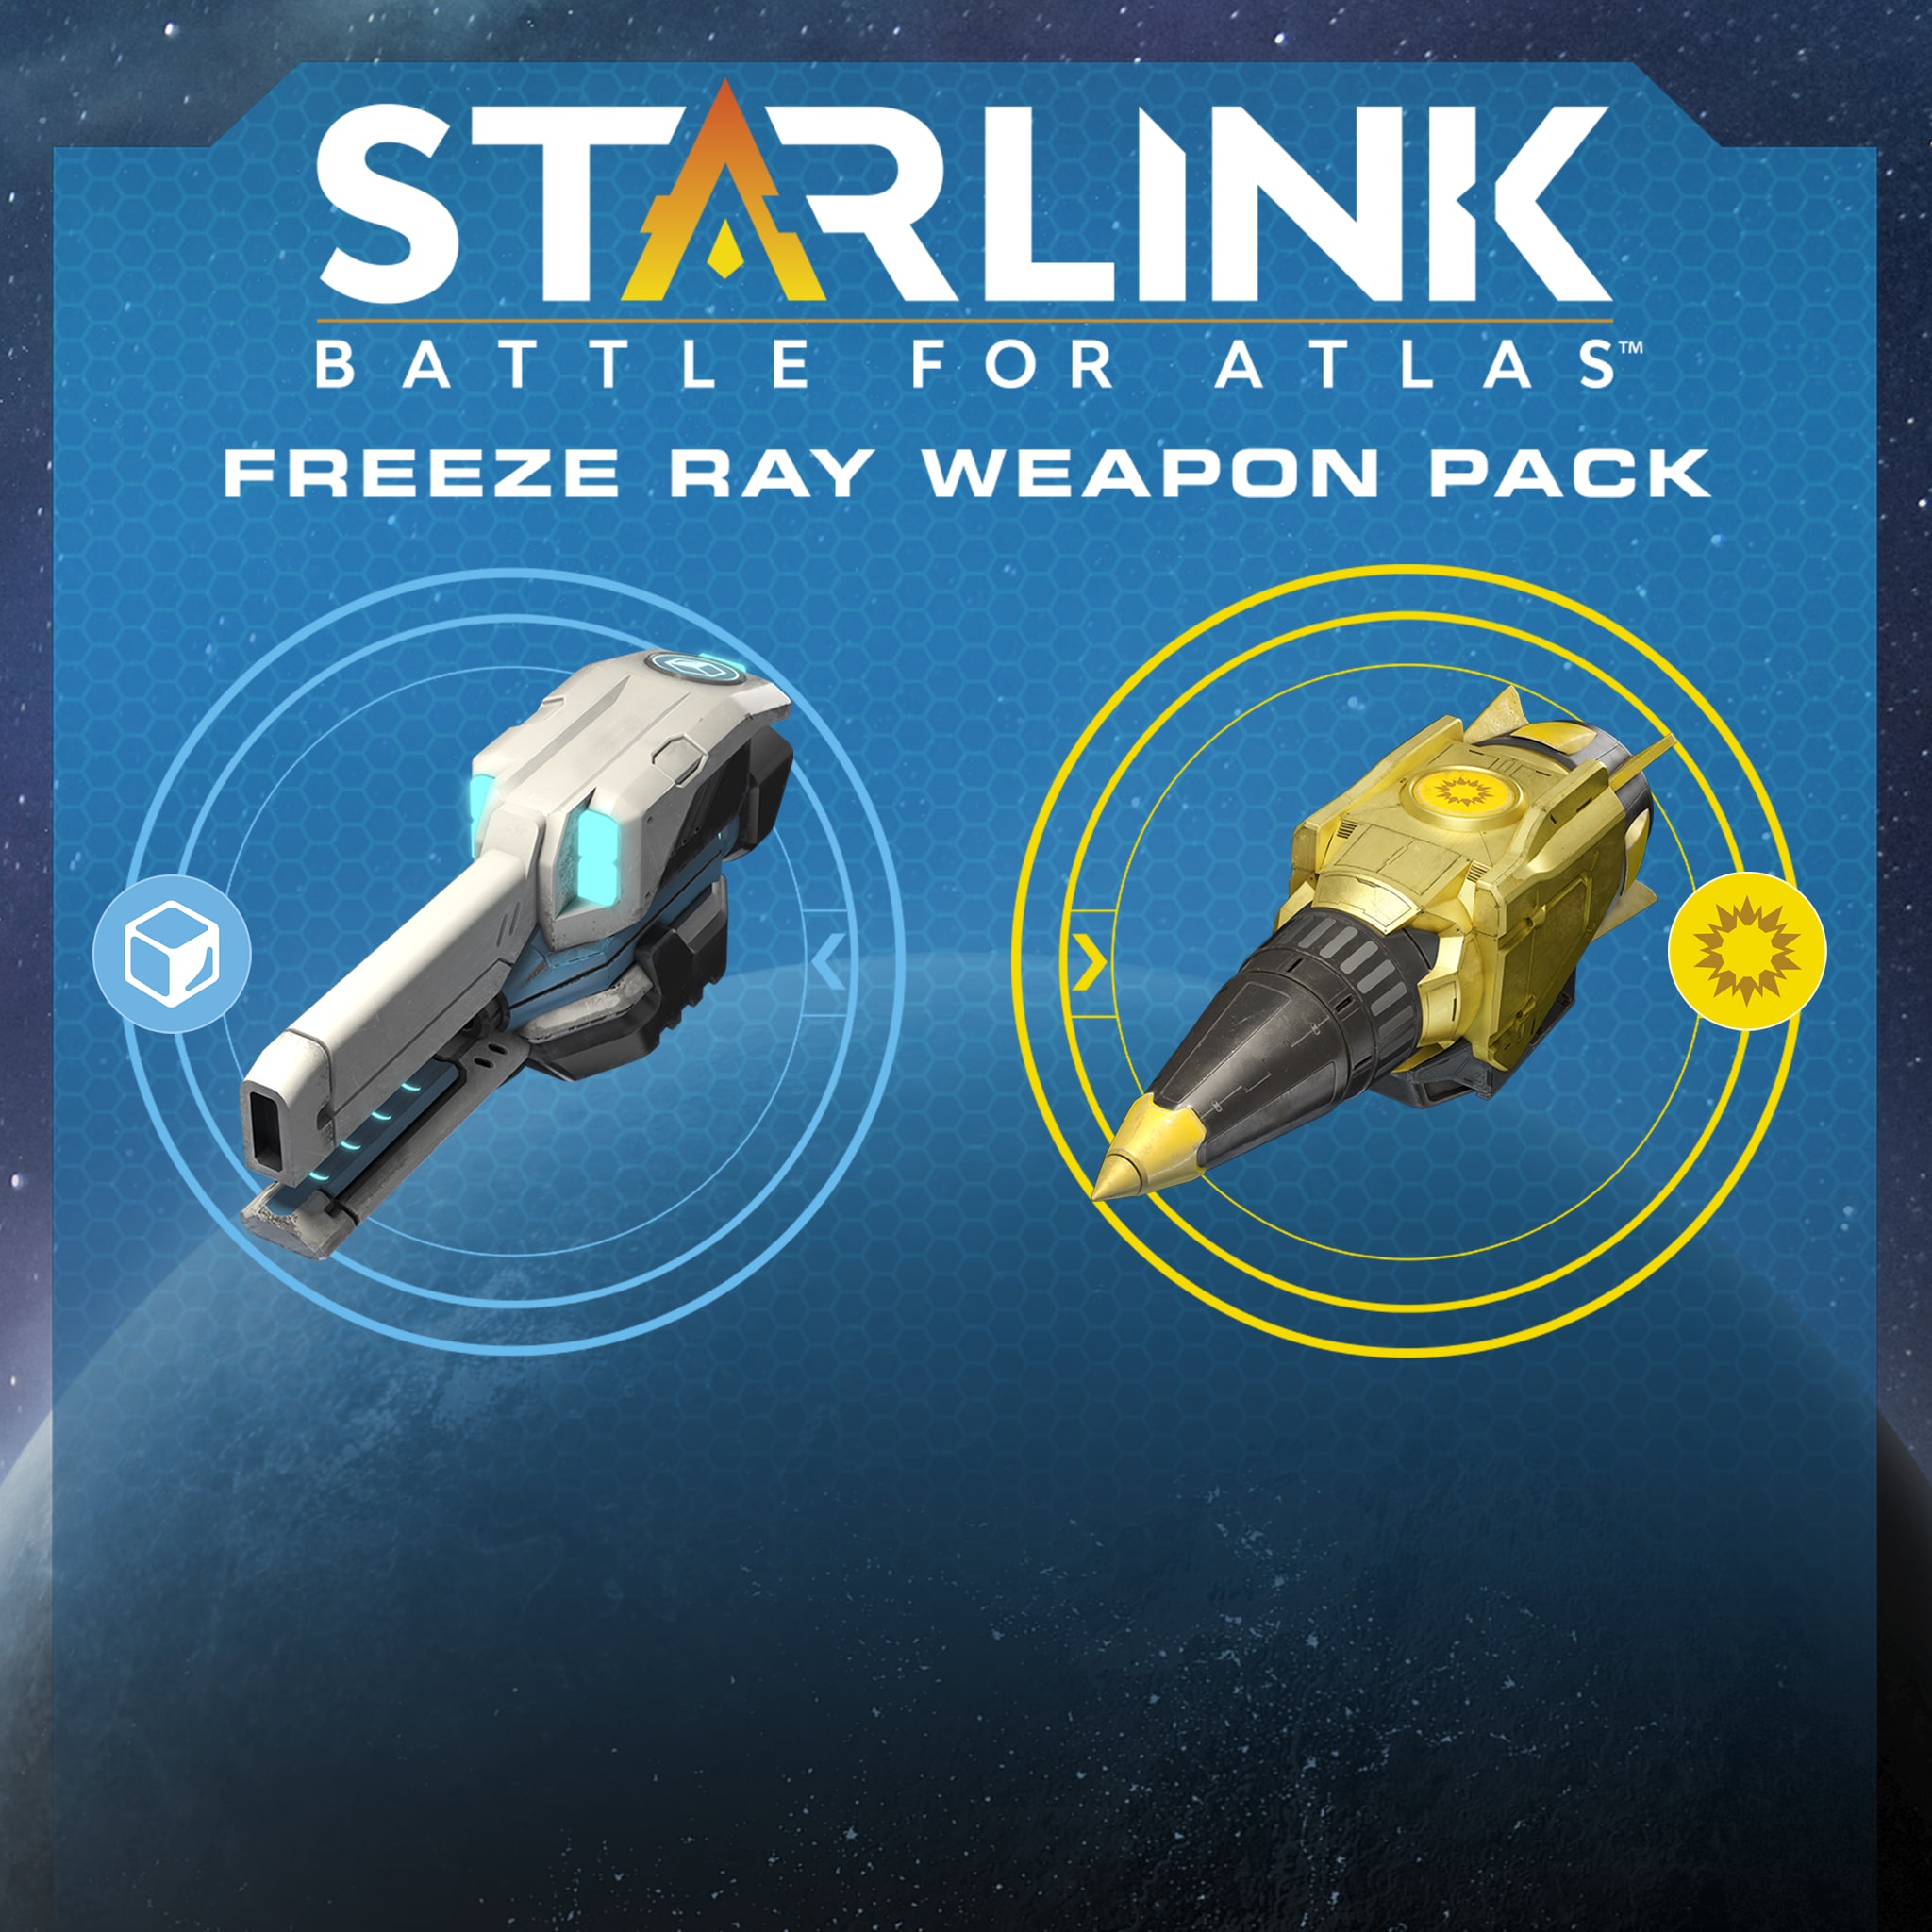 Starlink: Battle for Atlas Digital Freeze Ray Weapon Pack